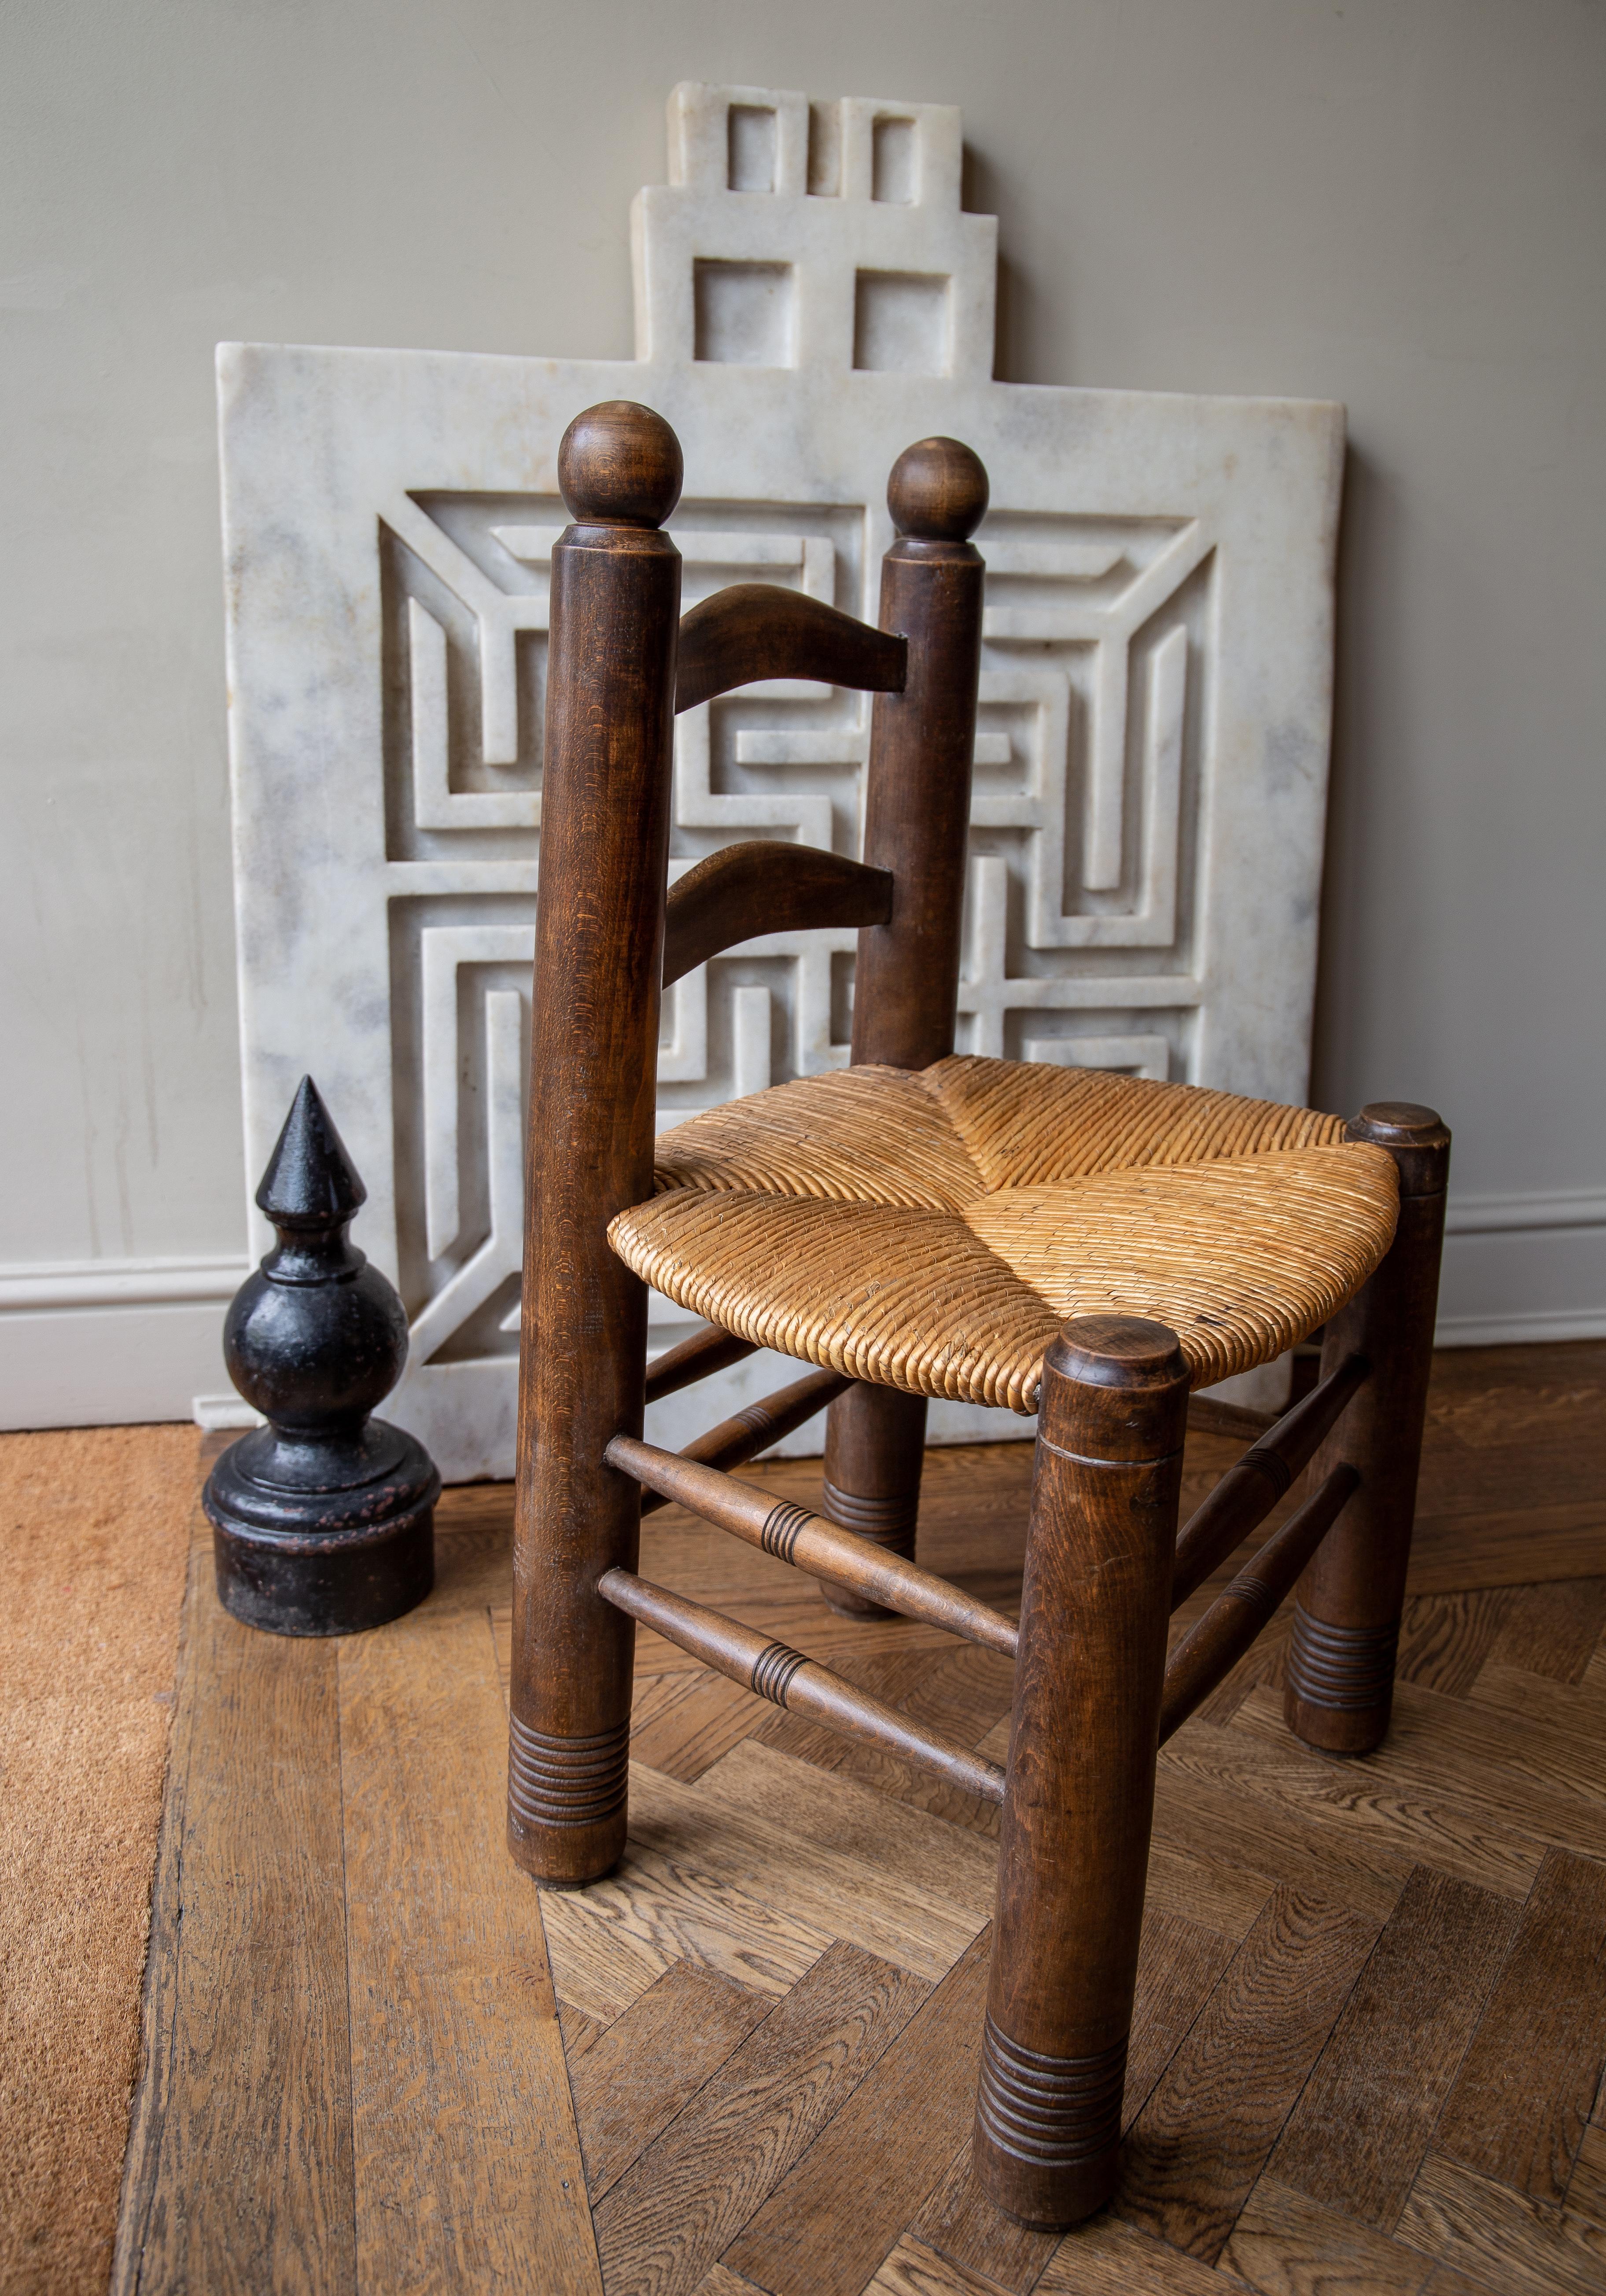 Reminiscent of the style of Perriand, yet with stout sculptural/architectural form with distinctive wide barrel turned frame and legs. Featuring beautiful pattern handwoven rush seat. Solid dense walnut construction - these chairs are heavy for